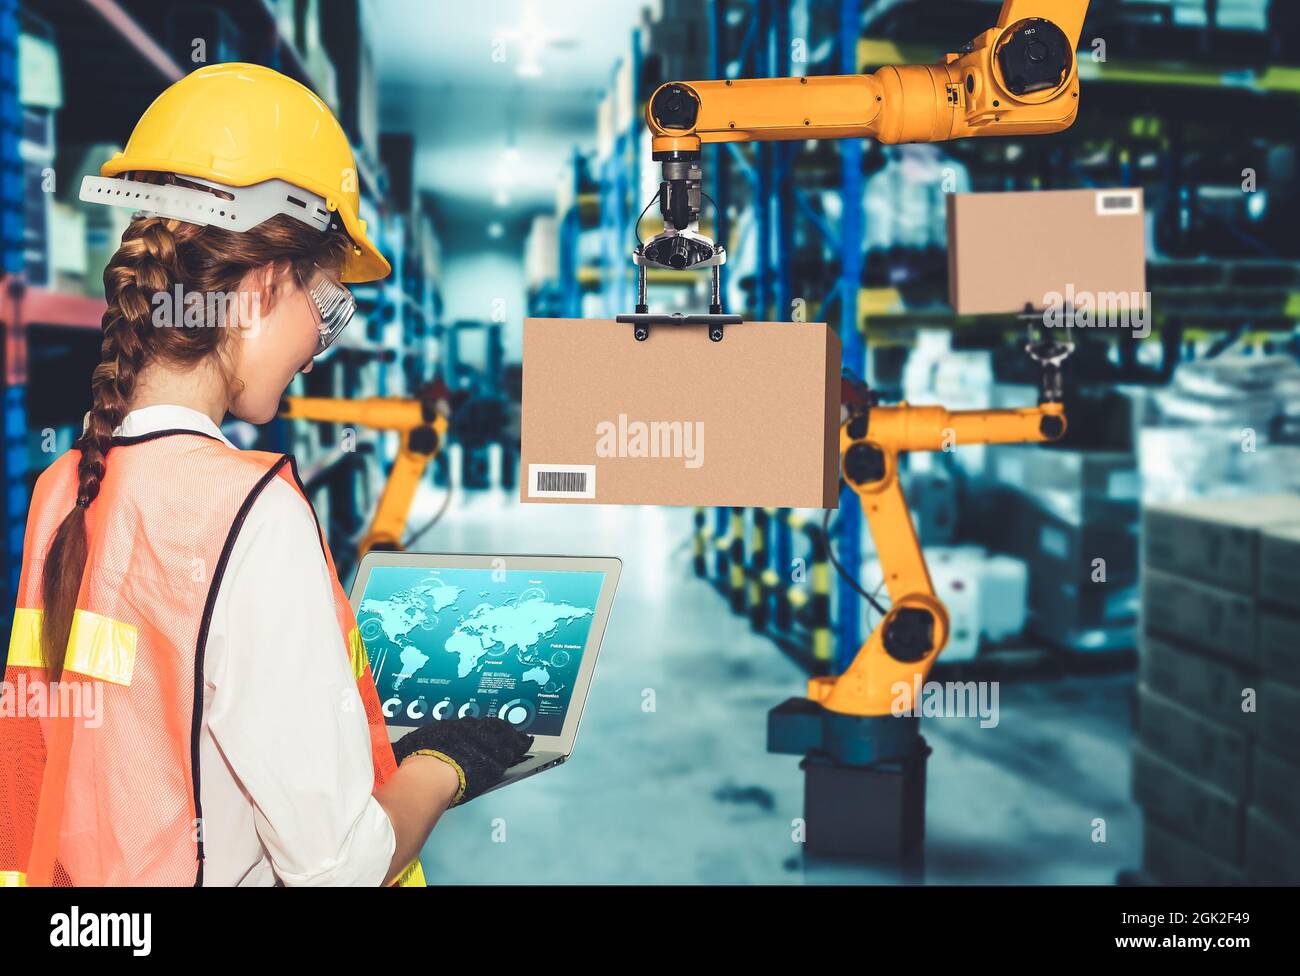 Smart robot arm systems for innovative warehouse and factory digital technology . Automation manufacturing robot controlled by industry engineering Stock Photo